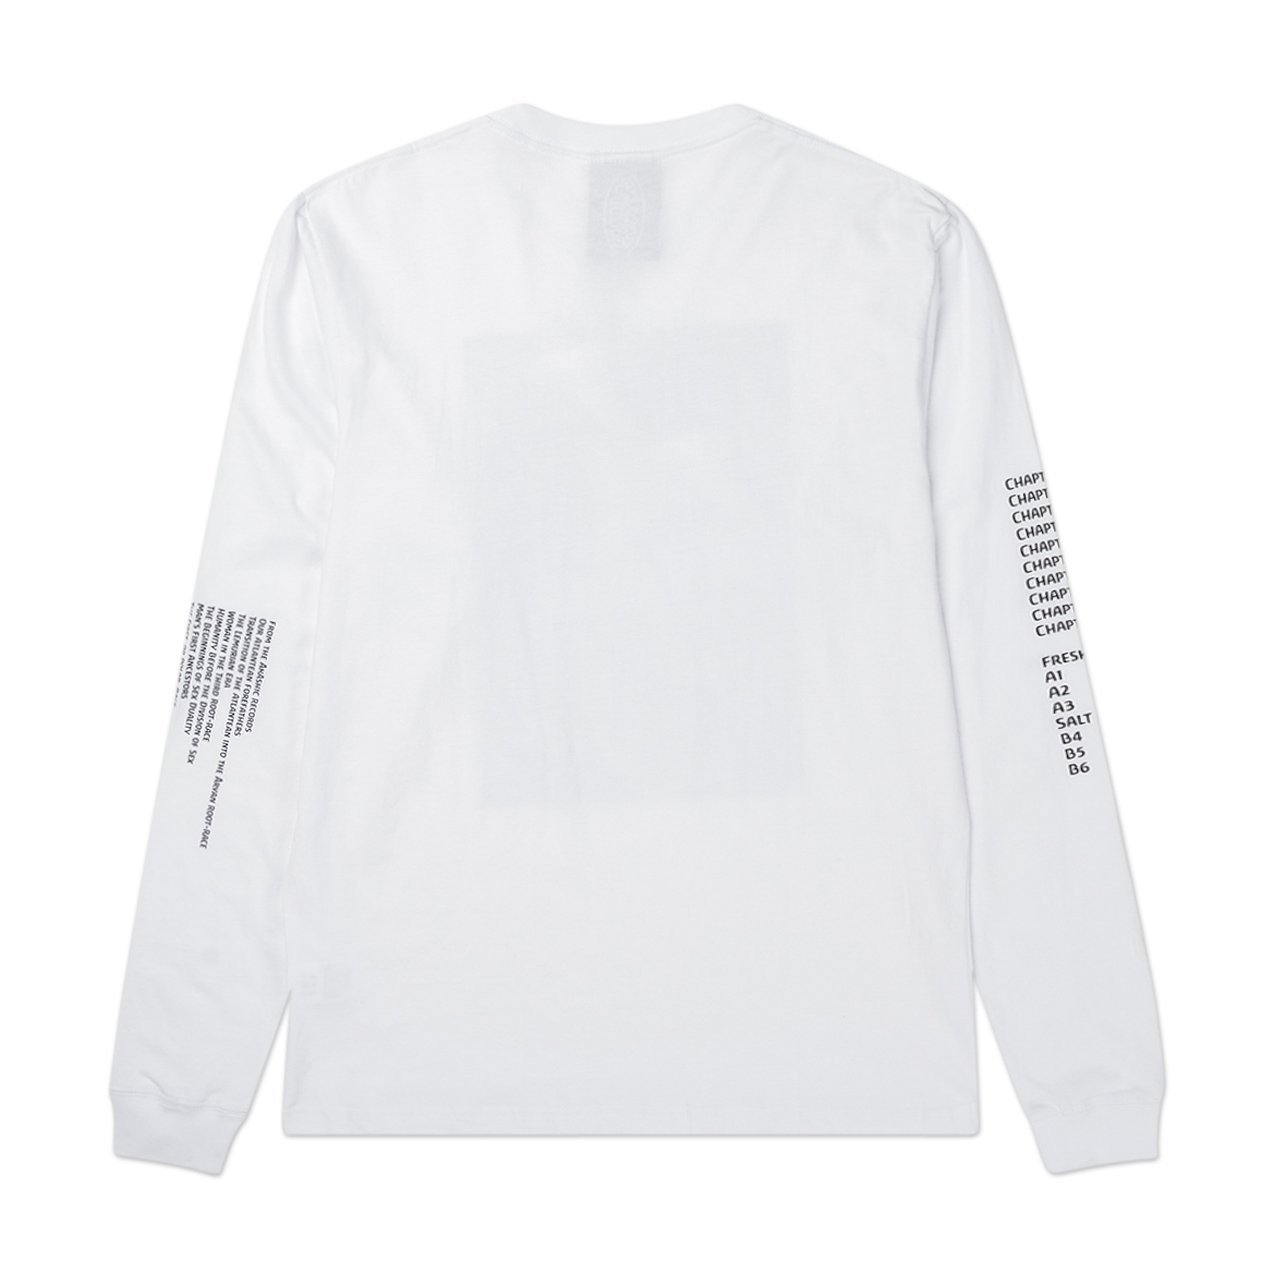 perks and mini ideas are real l/s tee (white) - 1346-b-ow - a.plus - Image - 2